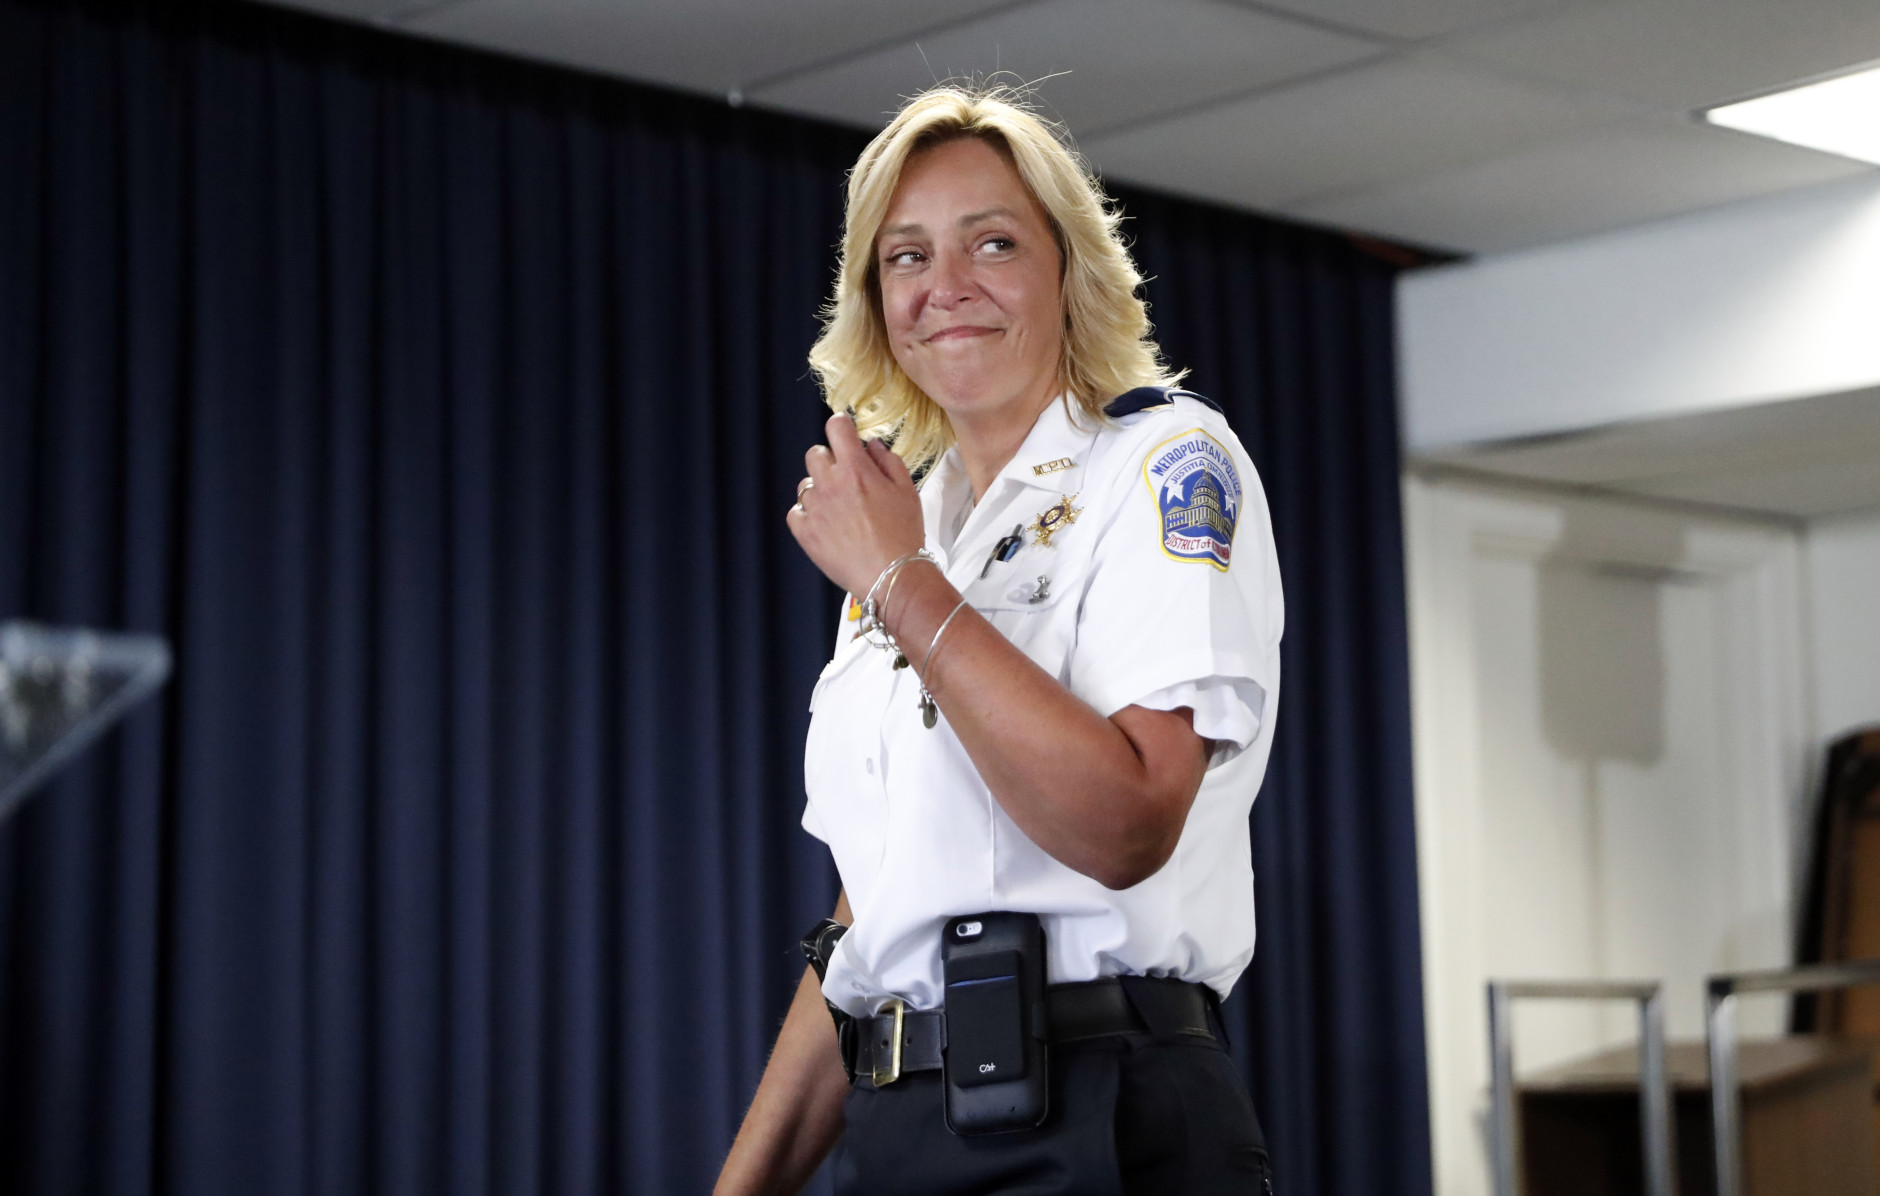 Washington police chief Cathy Lanier arrives for a news conference, Tuesday, Aug. 16, 2016 in Washington. Lanier is stepping down to become head of security for the National Football League. (AP Photo/Alex Brandon)